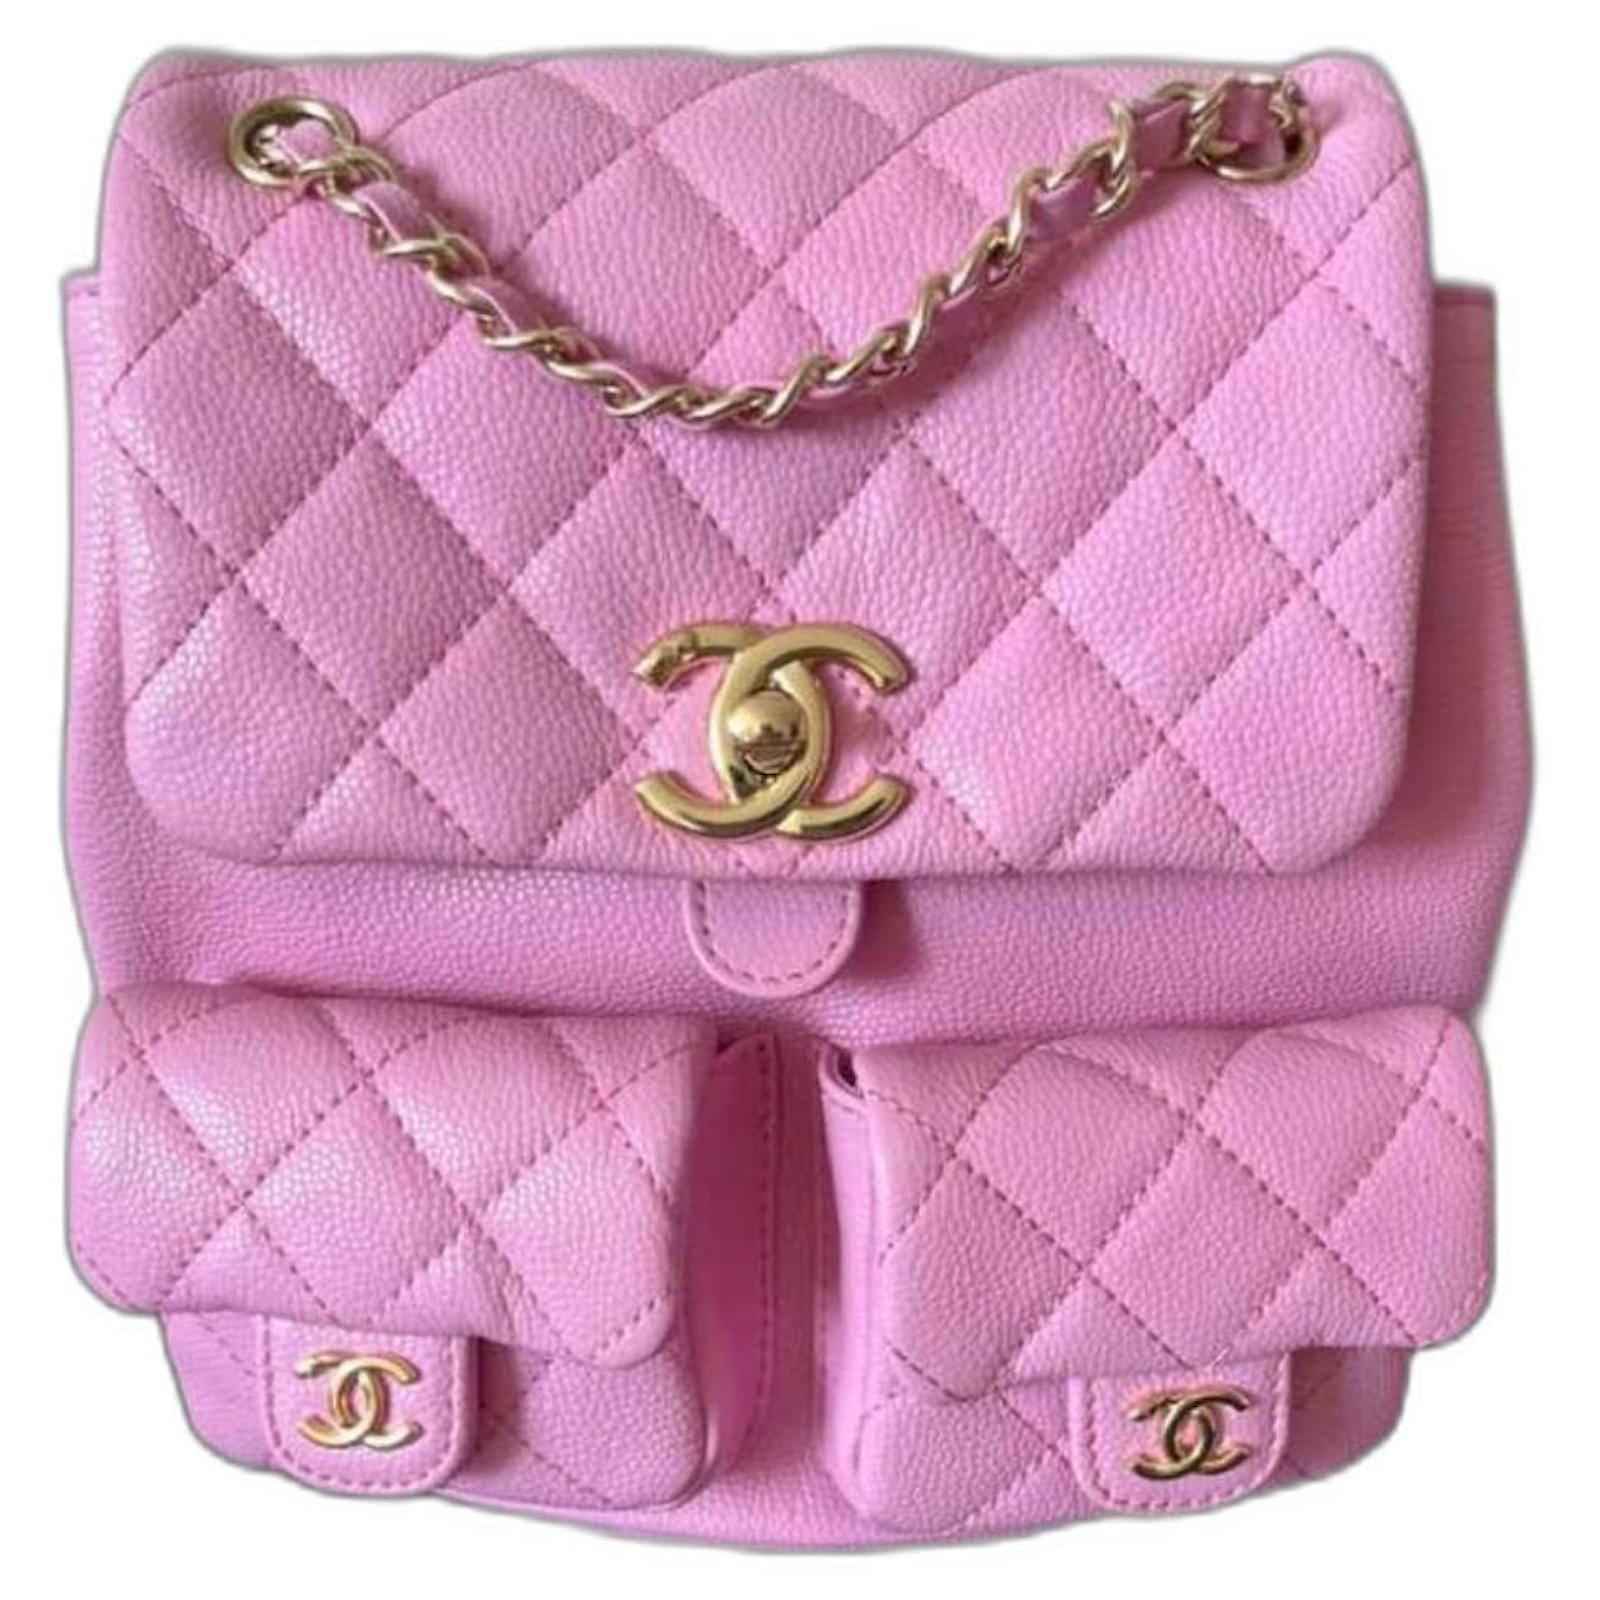 Executive 23P Chanel Backpack Timeless/ classique Pink Leather ref